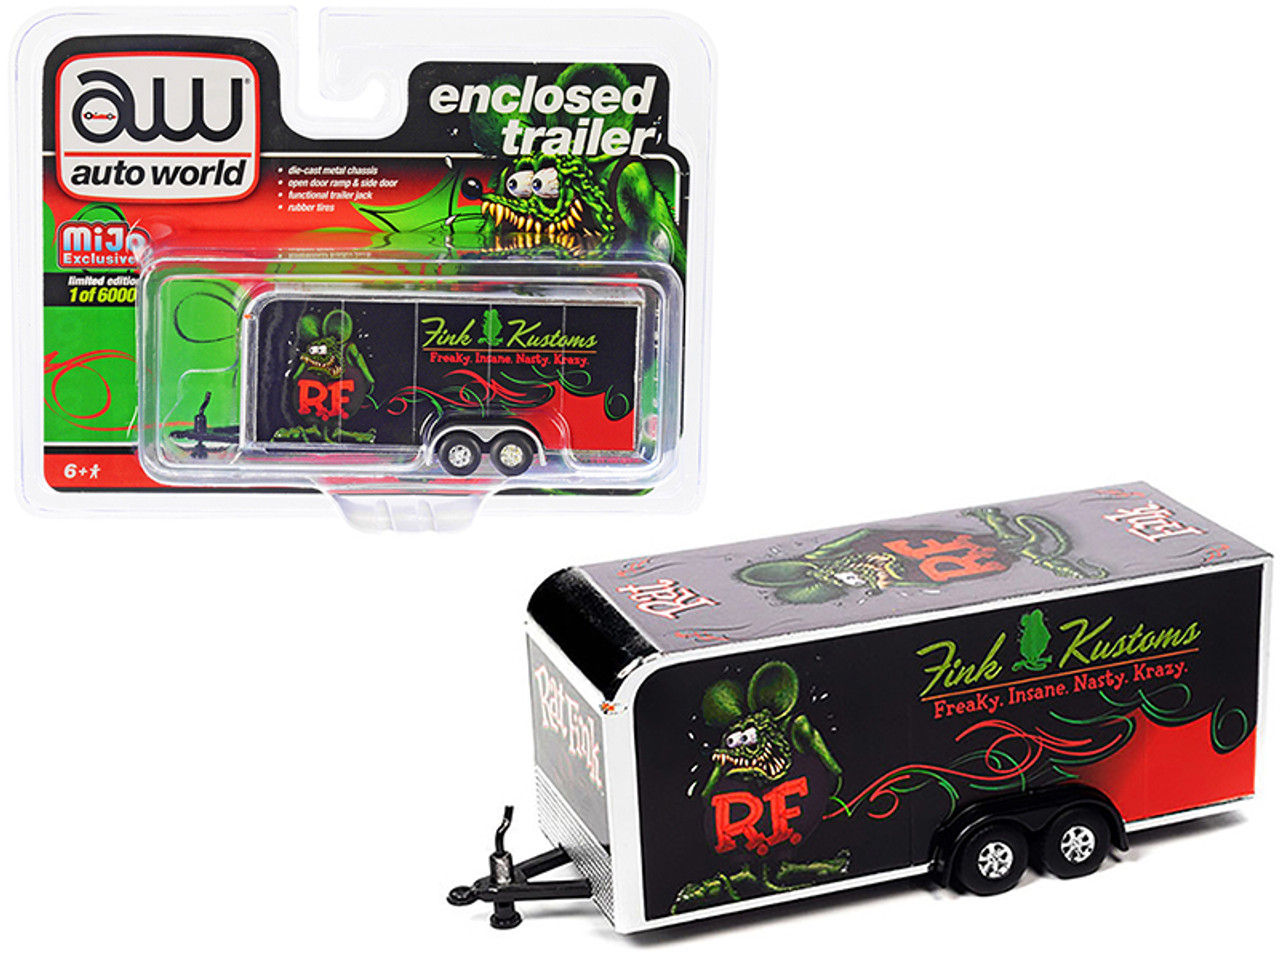 4-Wheel Enclosed Car Trailer Black with Silver Top and Graphics "Rat Fink" Limited Edition to 6000 pieces Worldwide 1/64 Diecast Model by Auto World